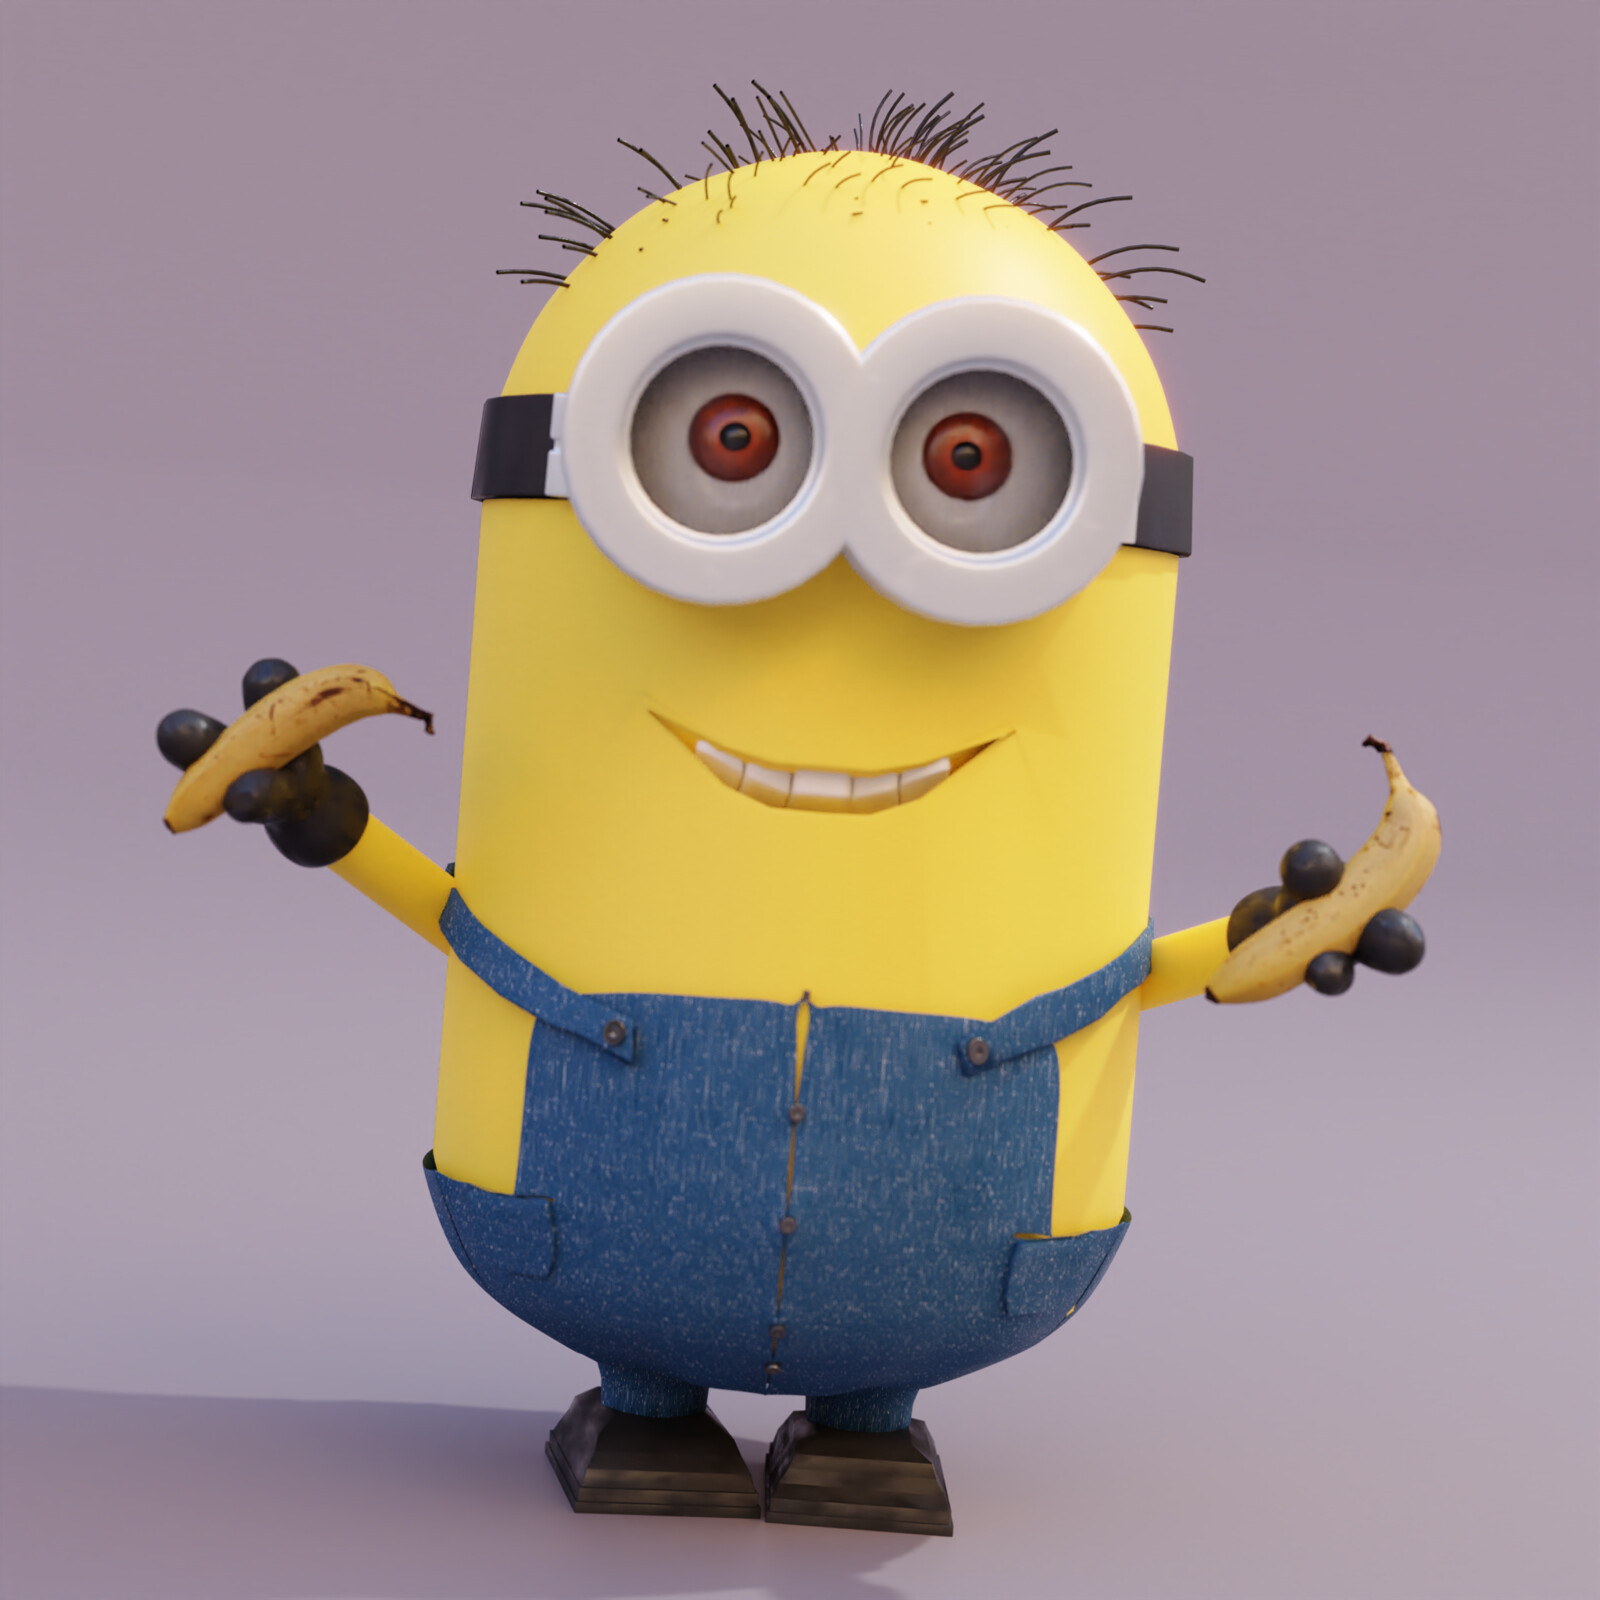 Minion posing with two bananas on hands.